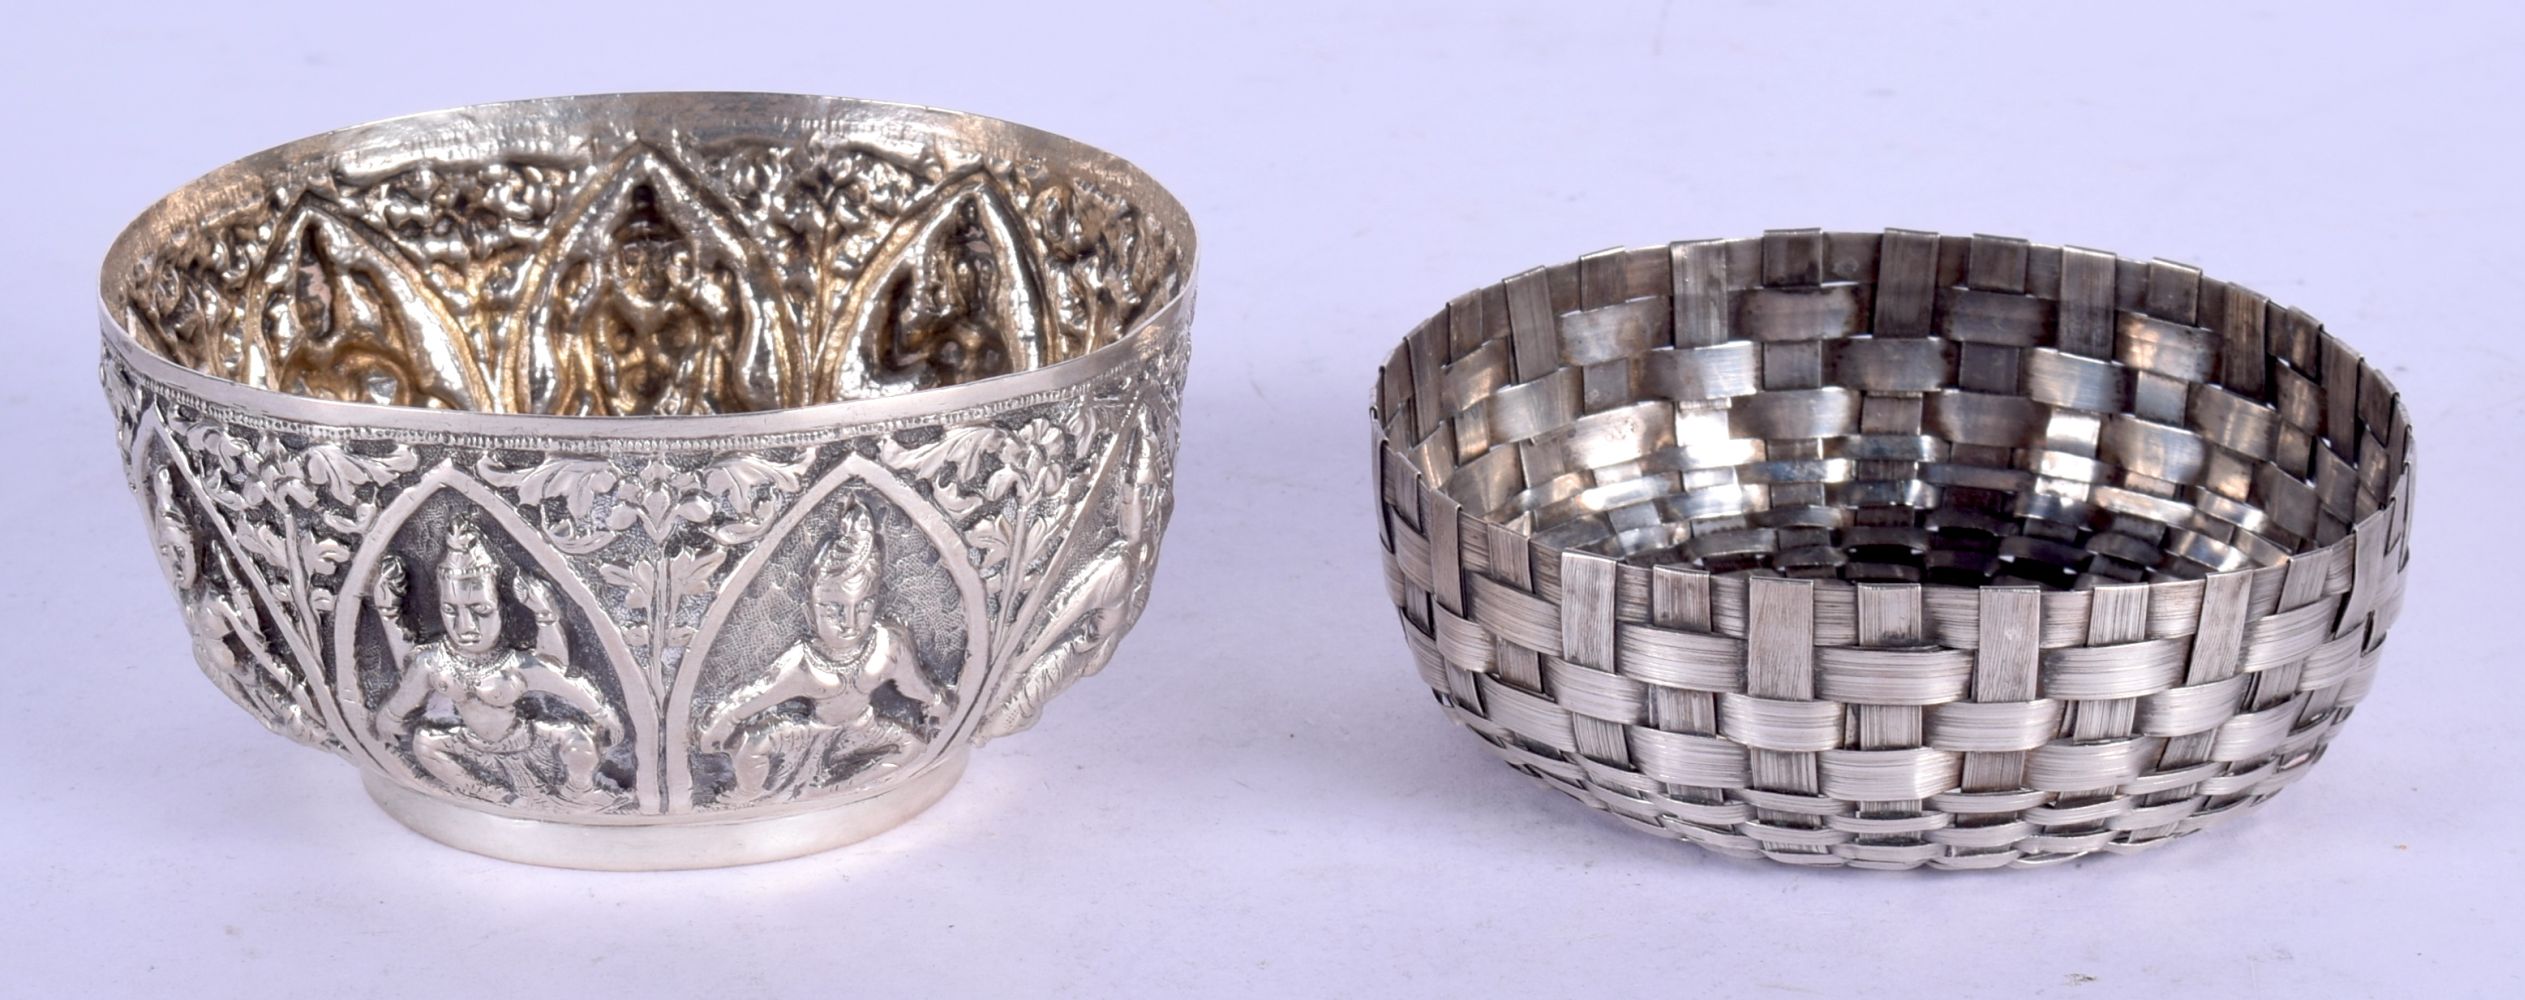 TWO SILVER BOWLS. 135 grams. 10 cm wide. (2) - Image 2 of 5